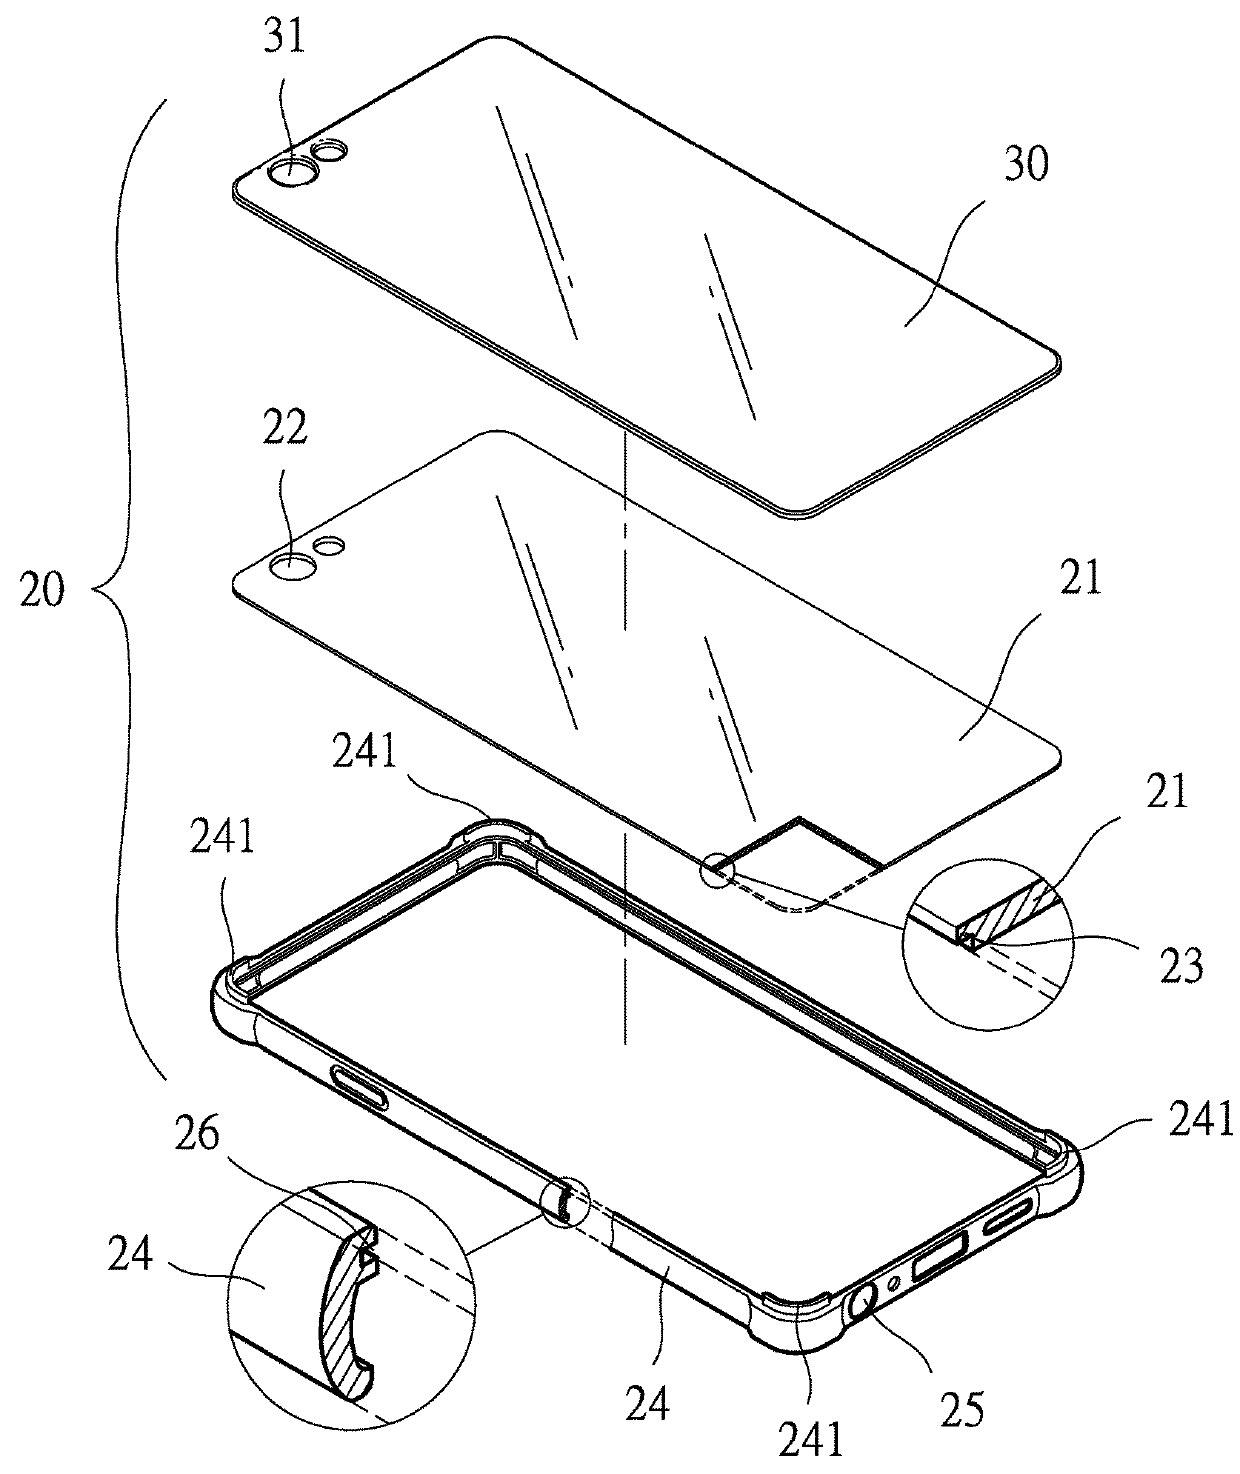 Protective Case for Portable Electronic Device